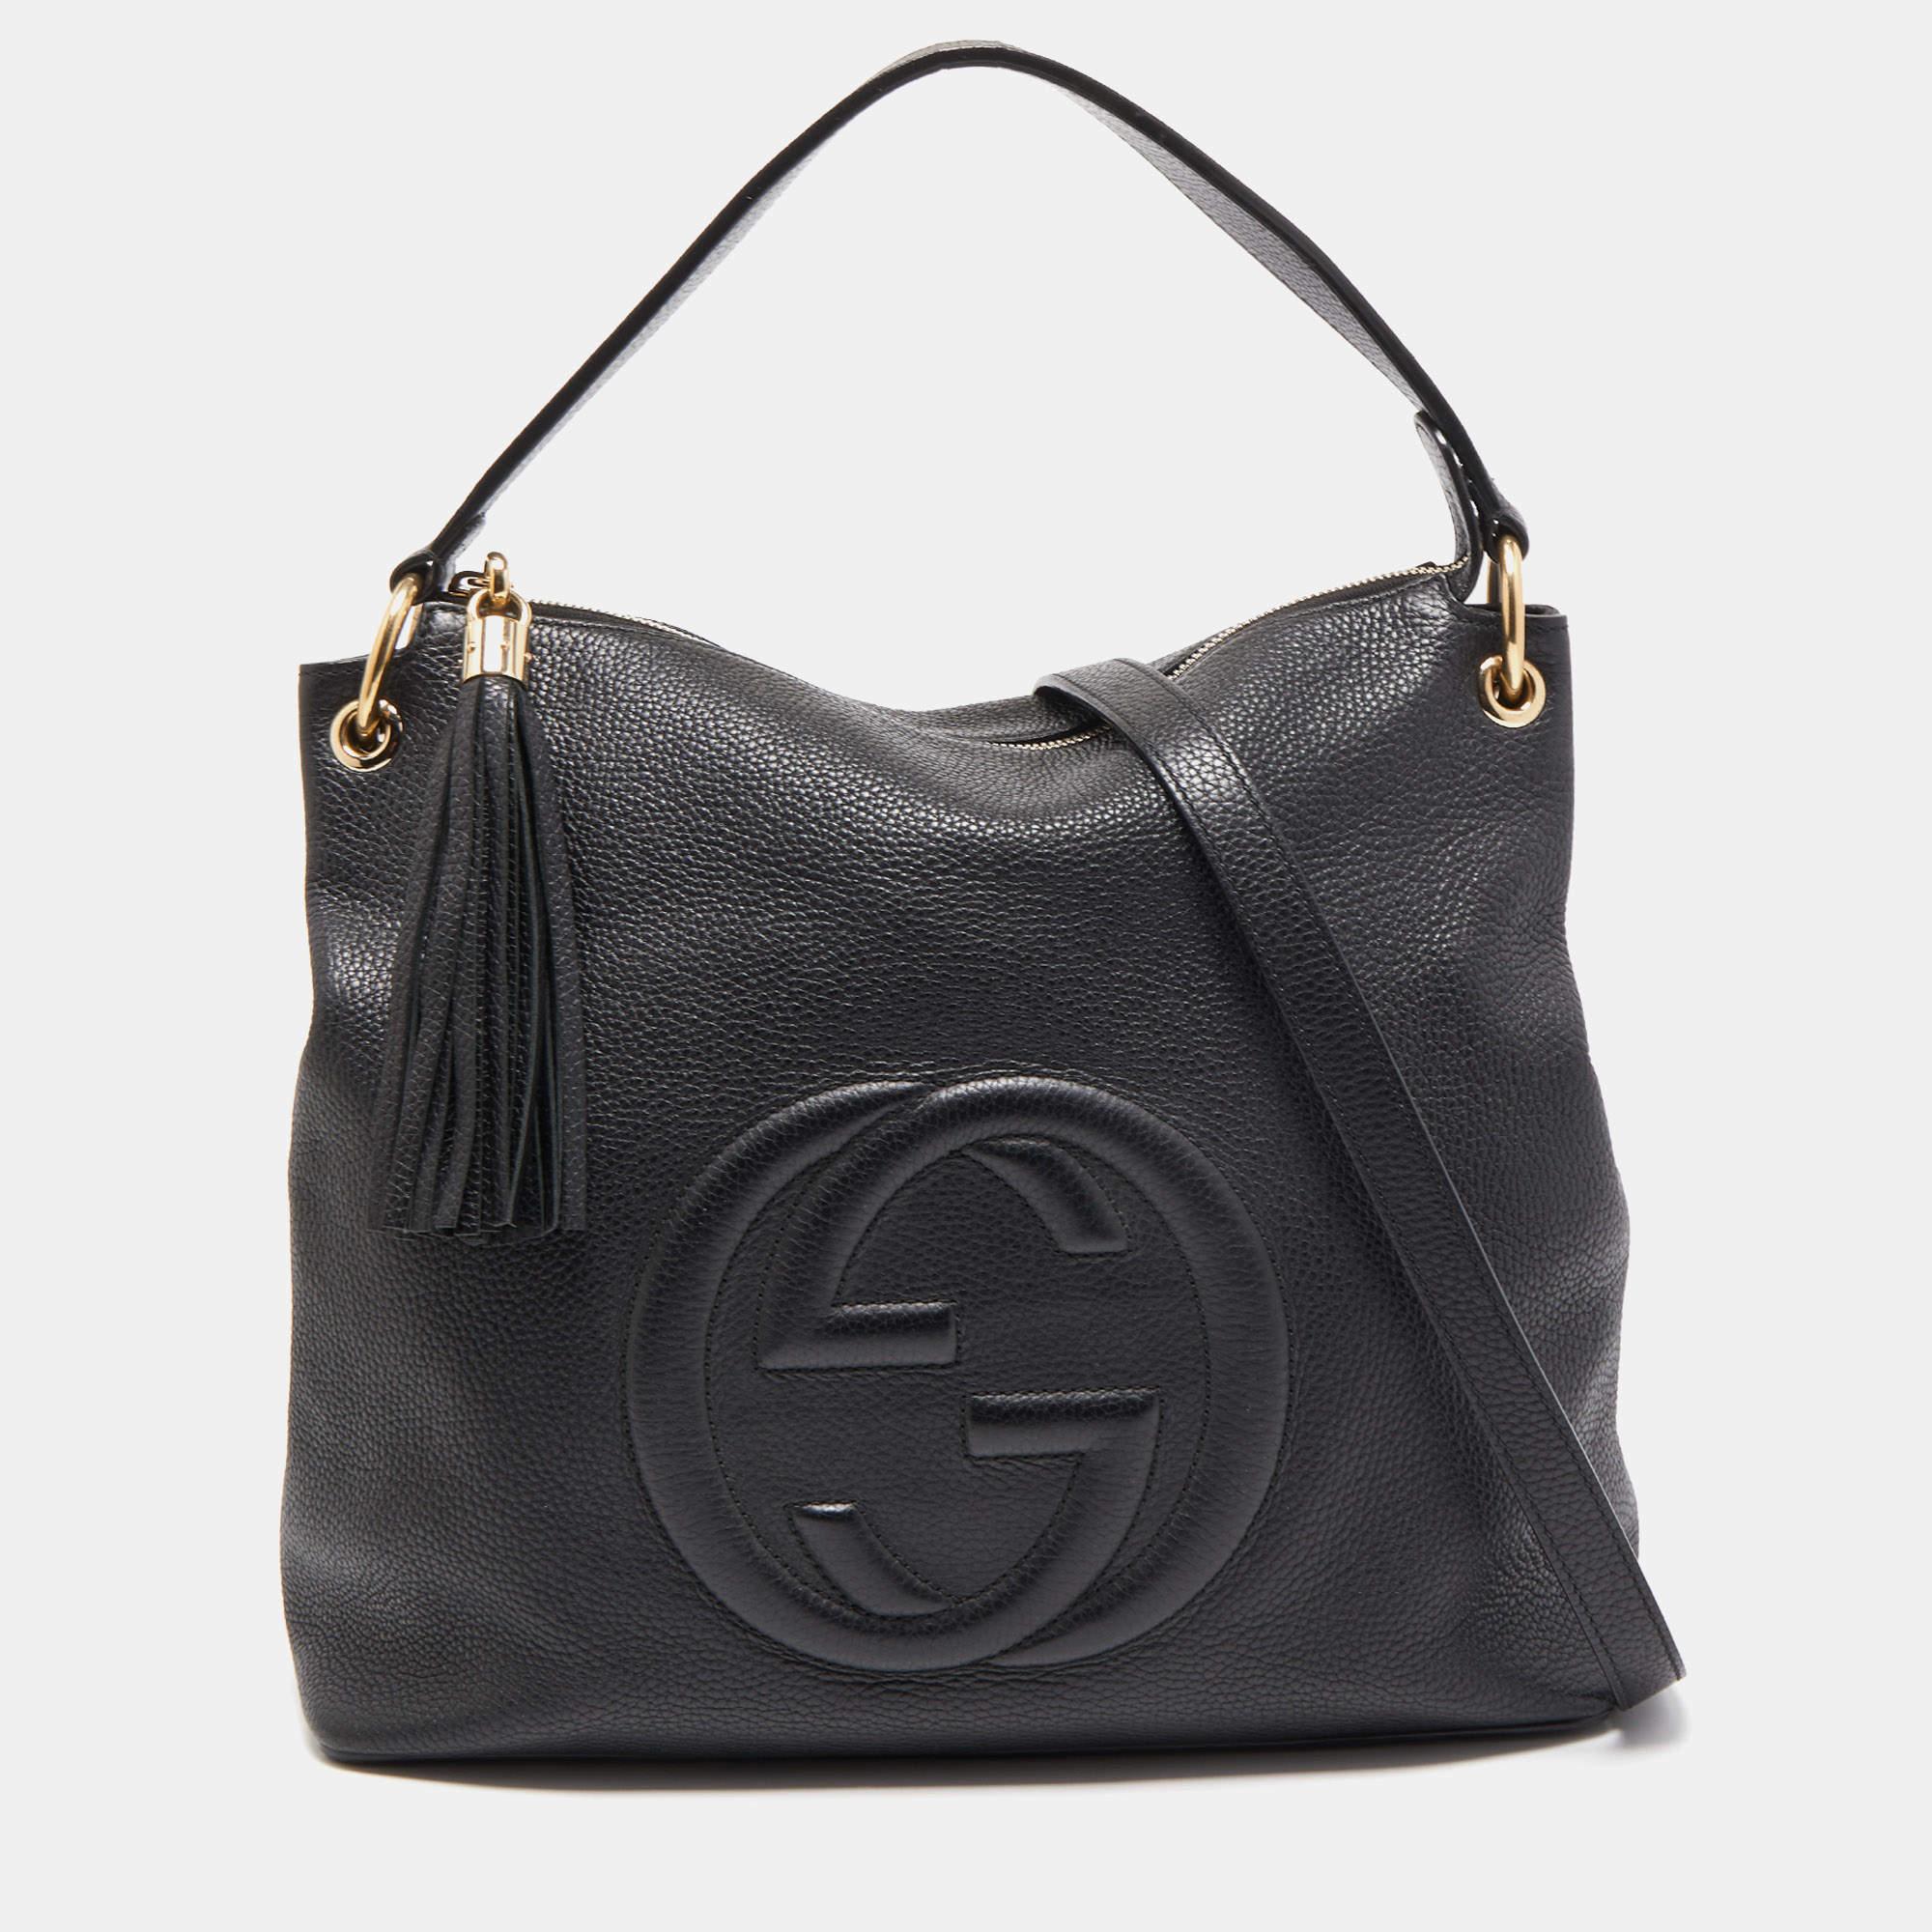 Stylish handbags never fail to make a fashionable impression. Make this designer hobo yours by pairing it with your sophisticated workwear as well as chic casual looks.

Includes: Detachable Strap